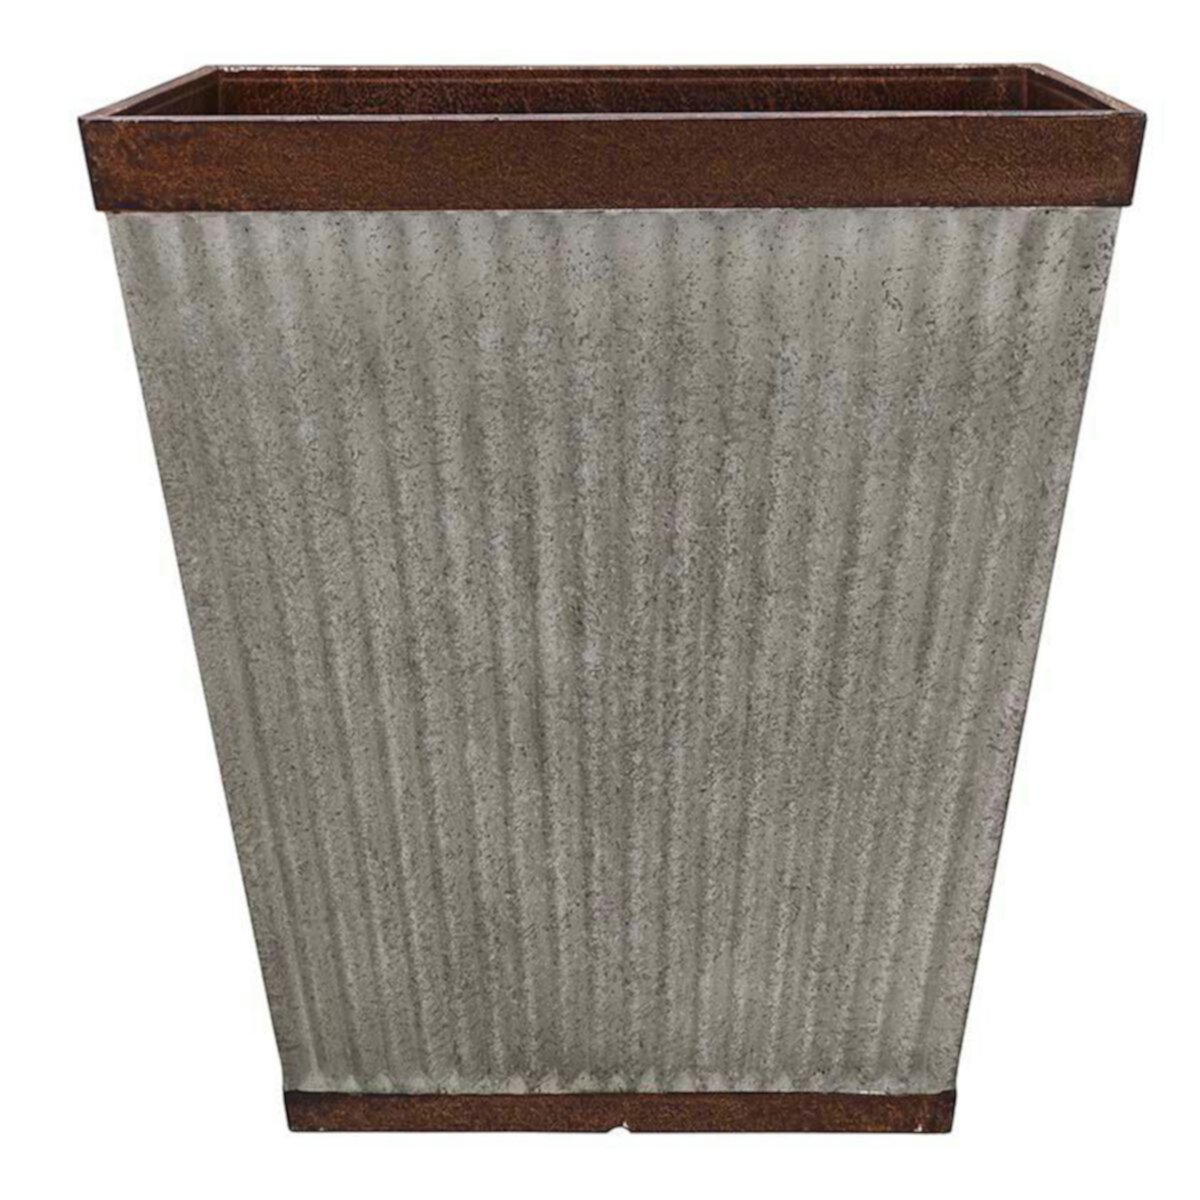 Southern Patio HDR-046851 16 Inch Square Rustic Resin Outdoor Box Flower Planter Southern Patio